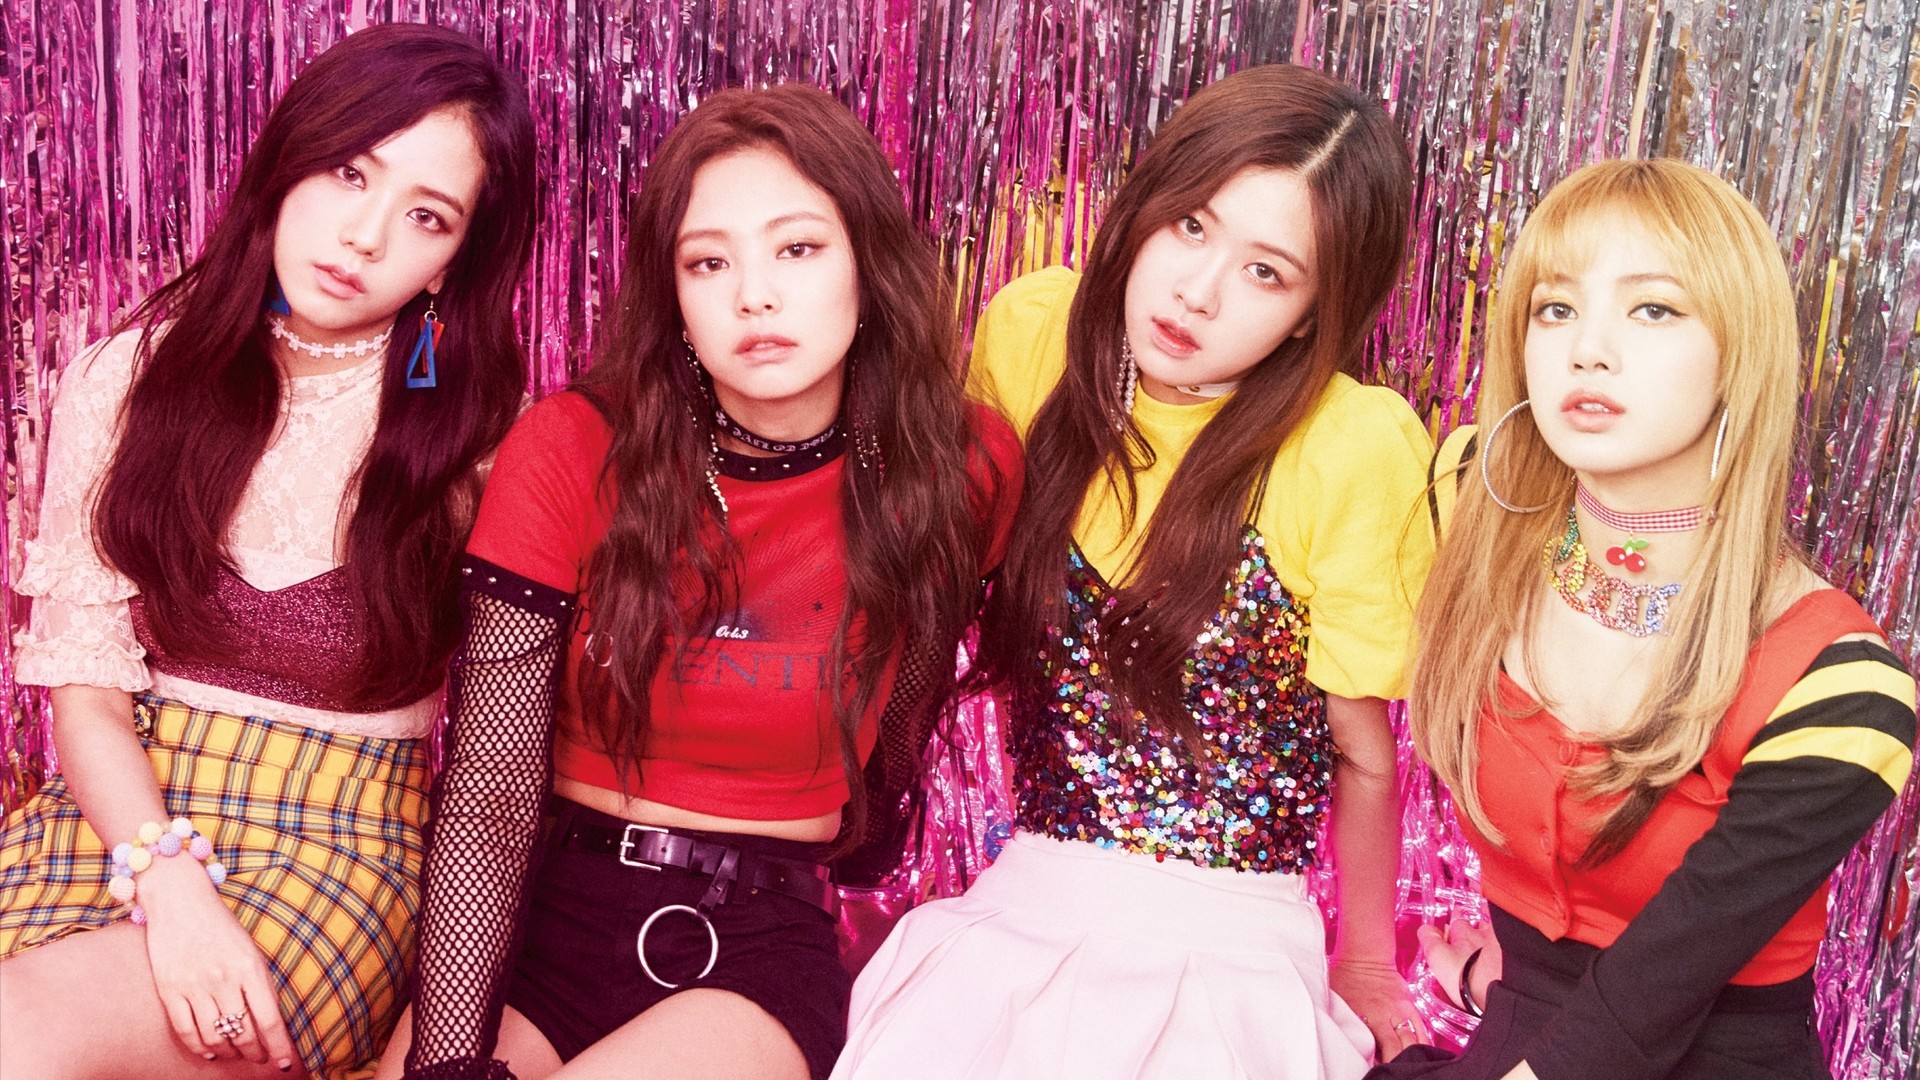 Blackpink Wallpaper HD With high-resolution 1920X1080 pixel. You can use this wallpaper for your Desktop Computer Backgrounds, Mac Wallpapers, Android Lock screen or iPhone Screensavers and another smartphone device